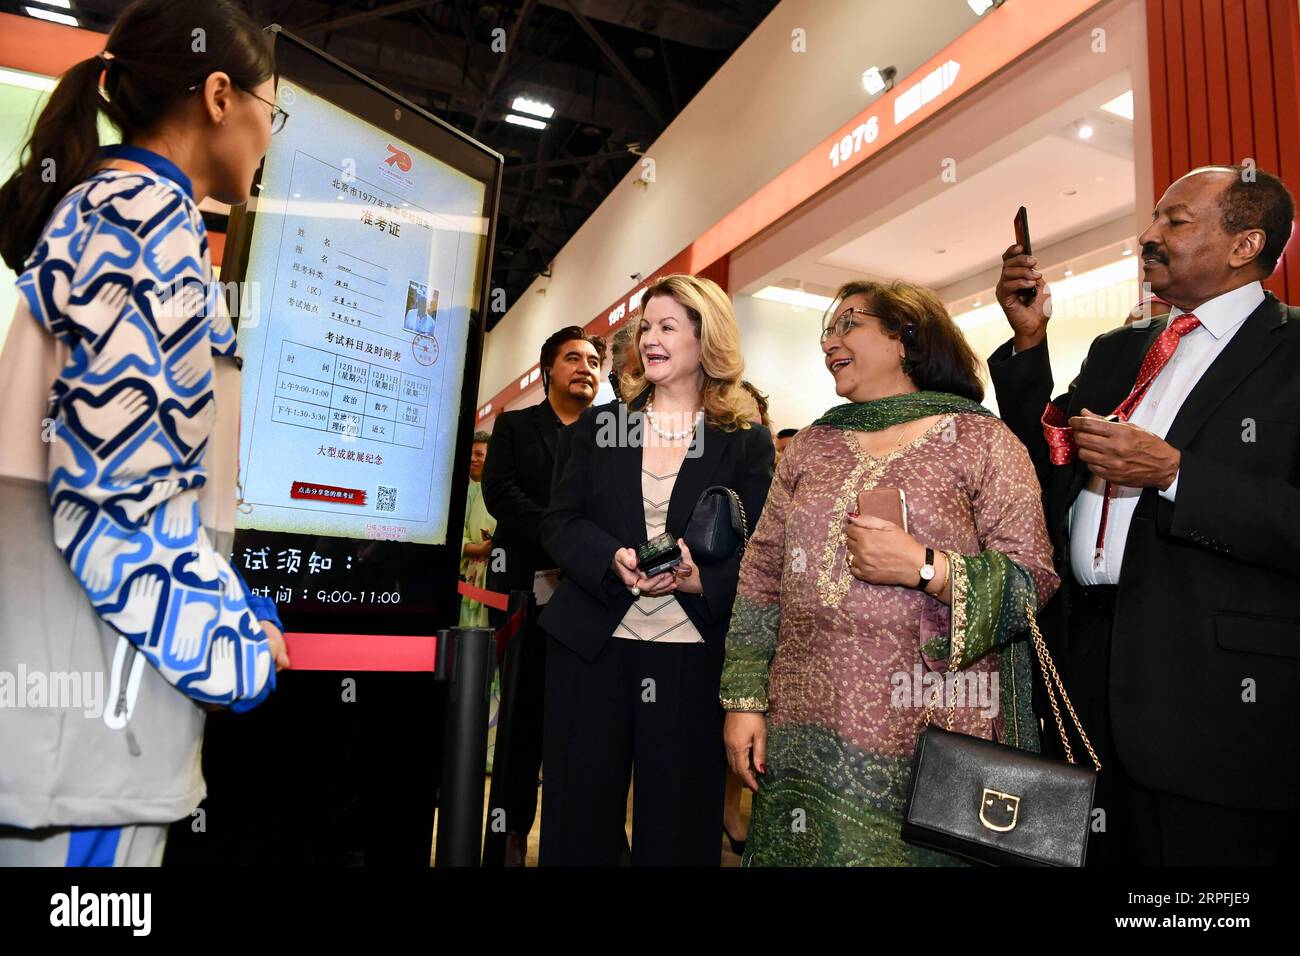 190925 -- BEIJING, Sept. 25, 2019 -- Foreign ambassadors, diplomats and guests view an interact display showing China s national college entrance examination in 1977 at a grand exhibition of achievements in commemoration of the 70th anniversary of the founding of the People s Republic of China PRC at the Beijing Exhibition Center in Beijing, capital of China, Sept. 25, 2019.  CHINA-BEIJING-70TH ANNIVERSARY-EXHIBITION CN JiangxKehong PUBLICATIONxNOTxINxCHN Stock Photo